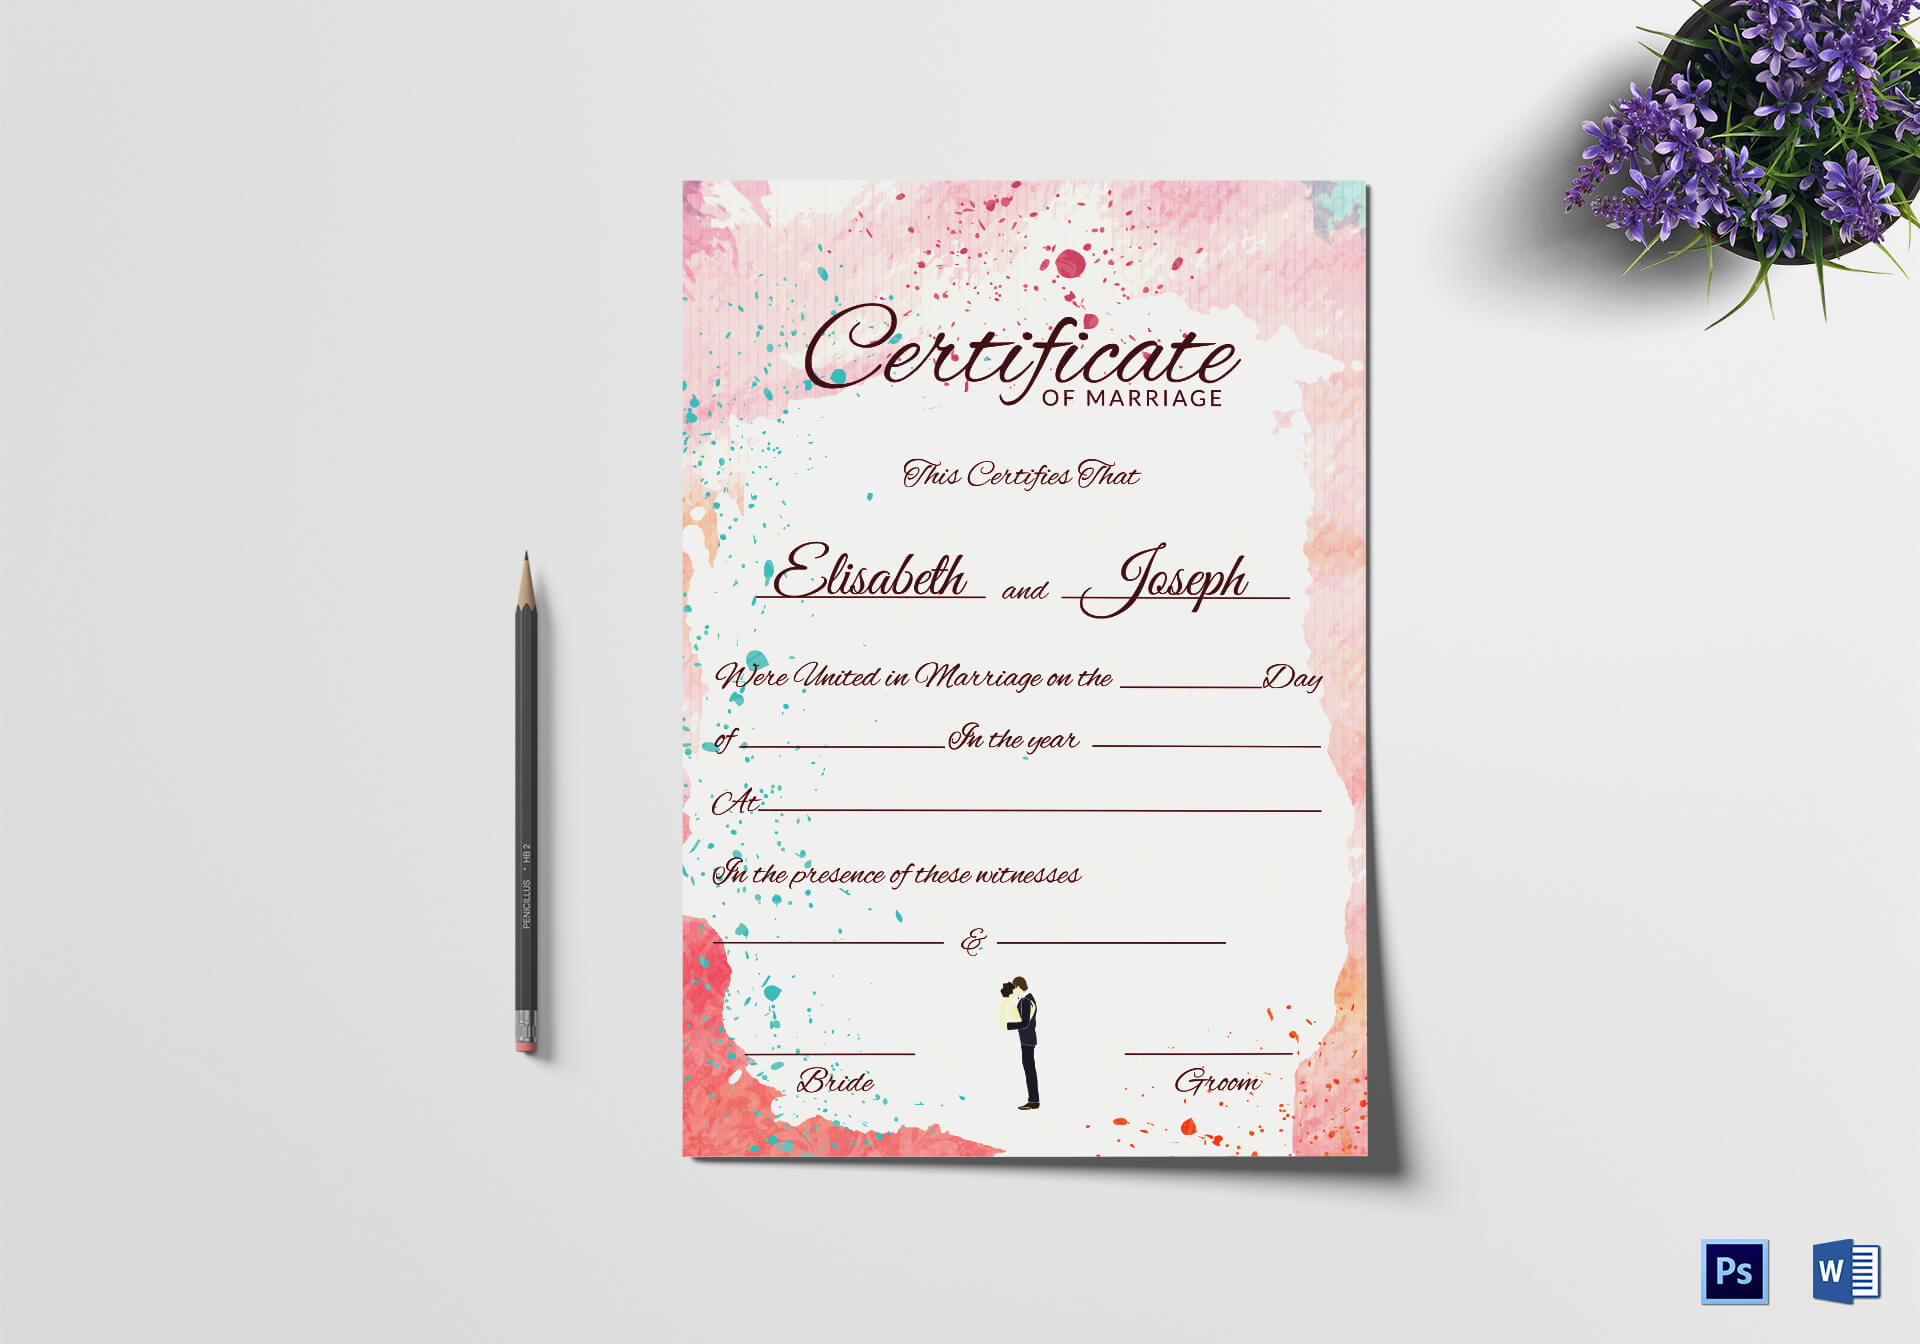 Christian Marriage Certificate Template Throughout Christian Certificate Template